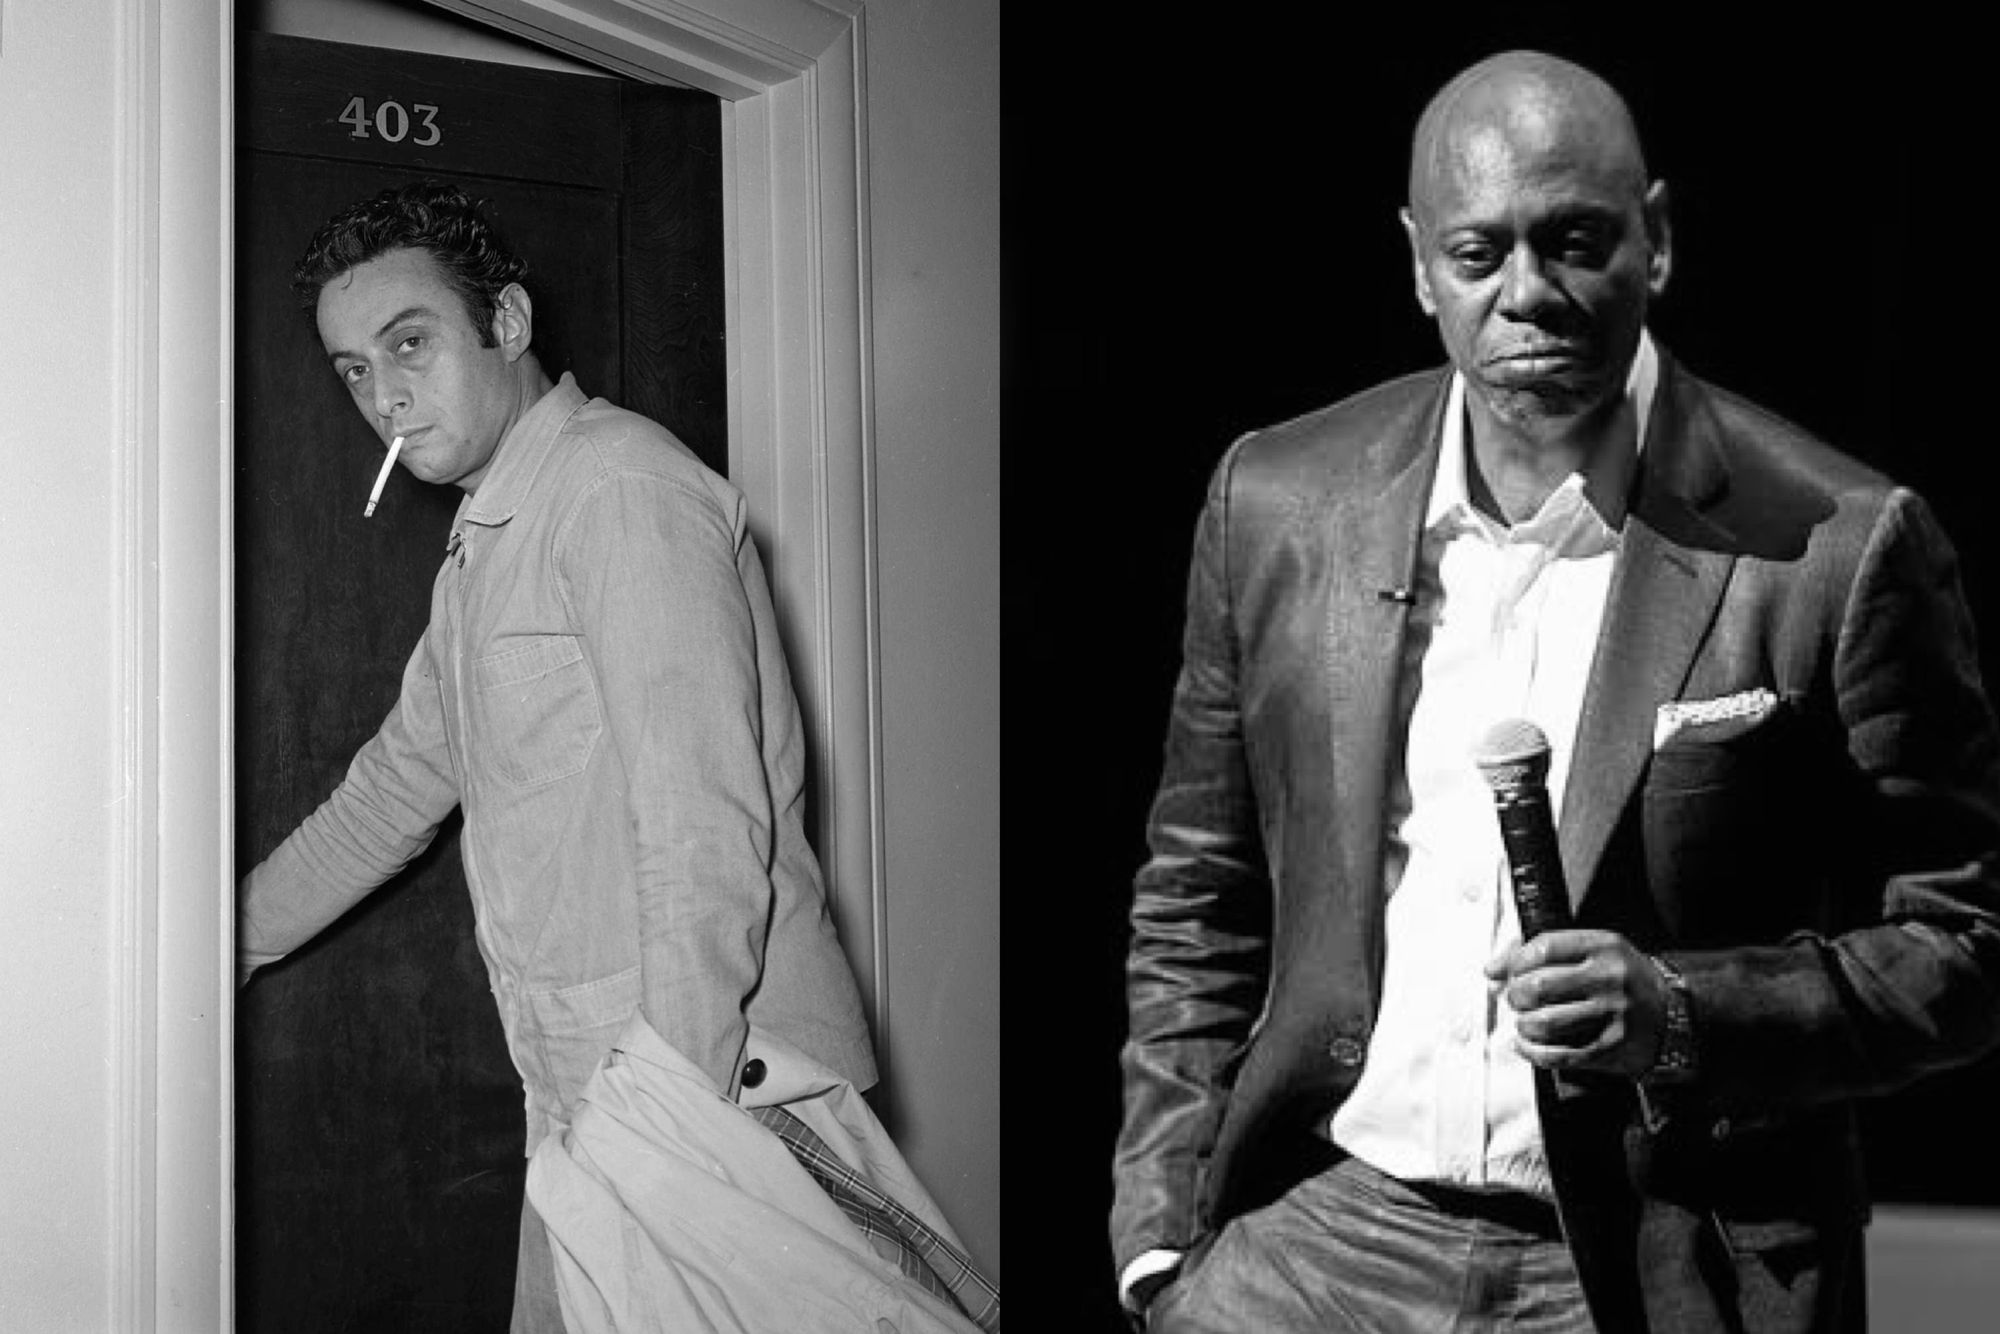 Lenny Bruce and Dave Chappelle